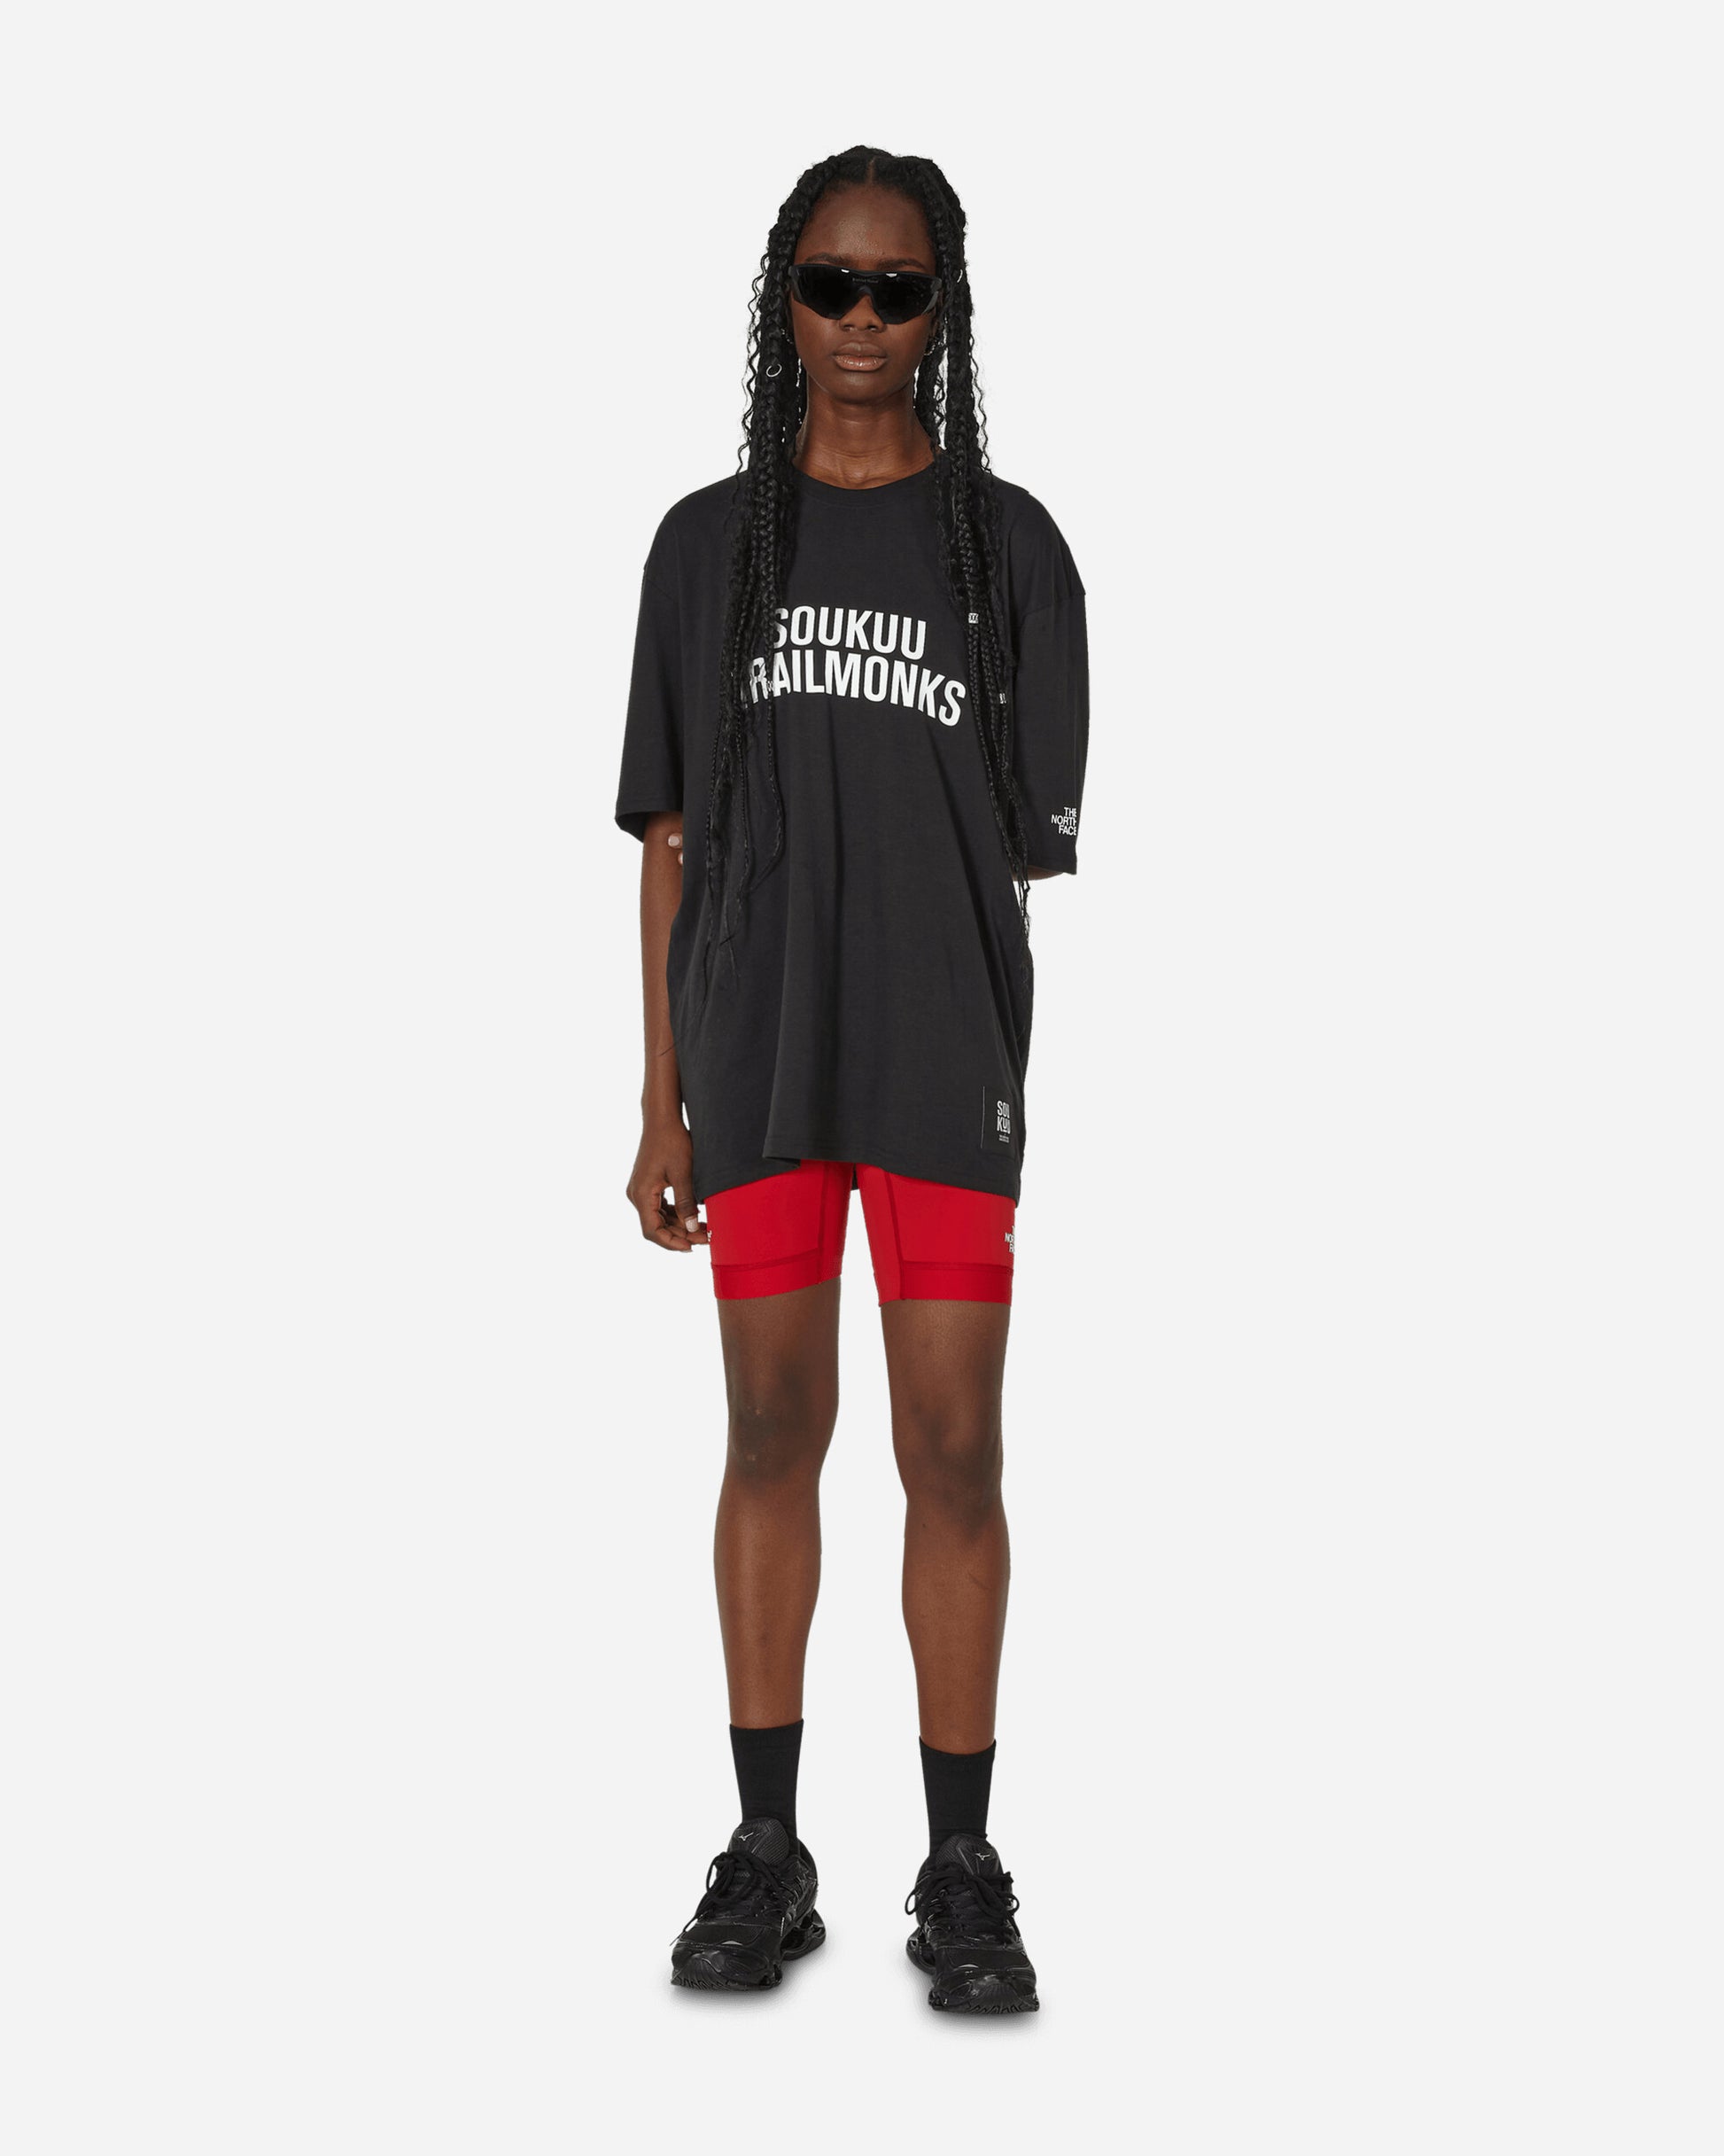 The North Face Project X Tnf X Project U Performance Short Tight Chili Pepper Red-TNF Black Shorts Short NF0A87UM VOL1